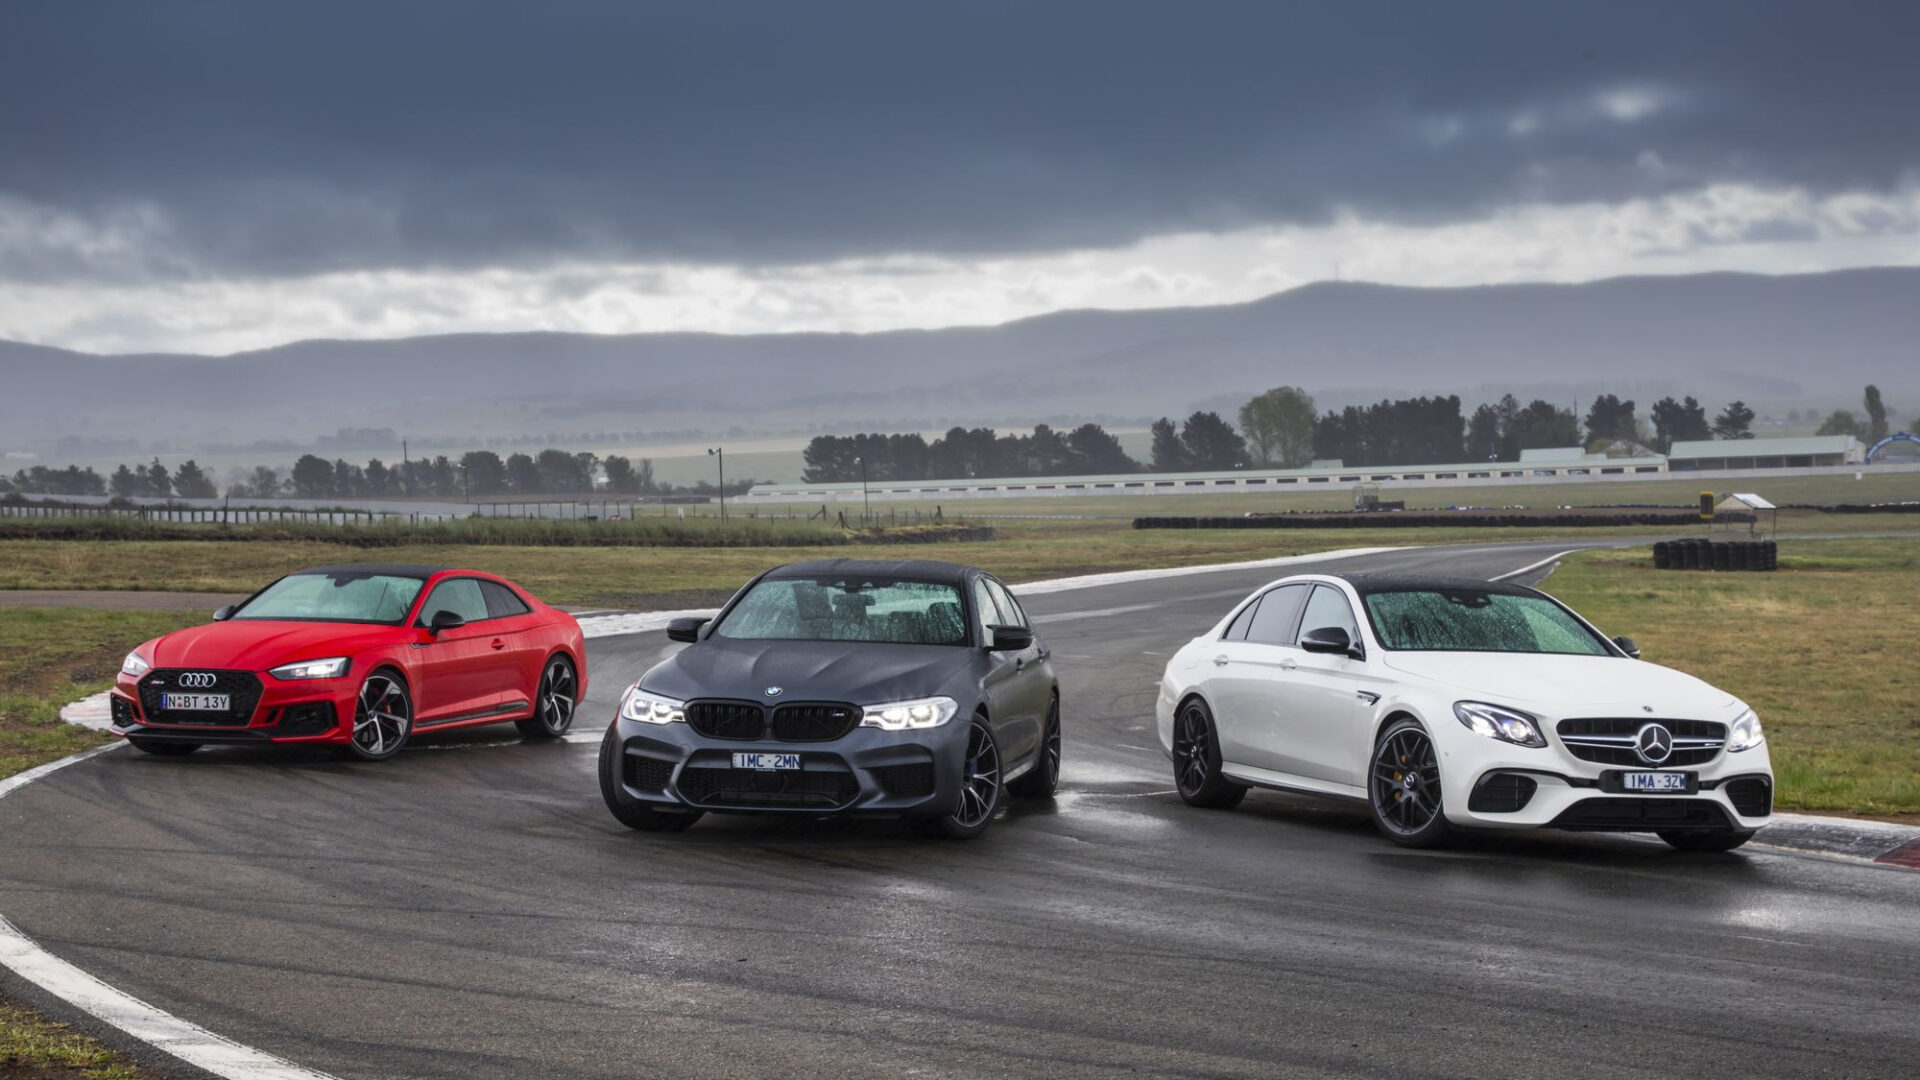 Best Sports Cars Under 60k Get the Speed & Style You Crave on a Budget